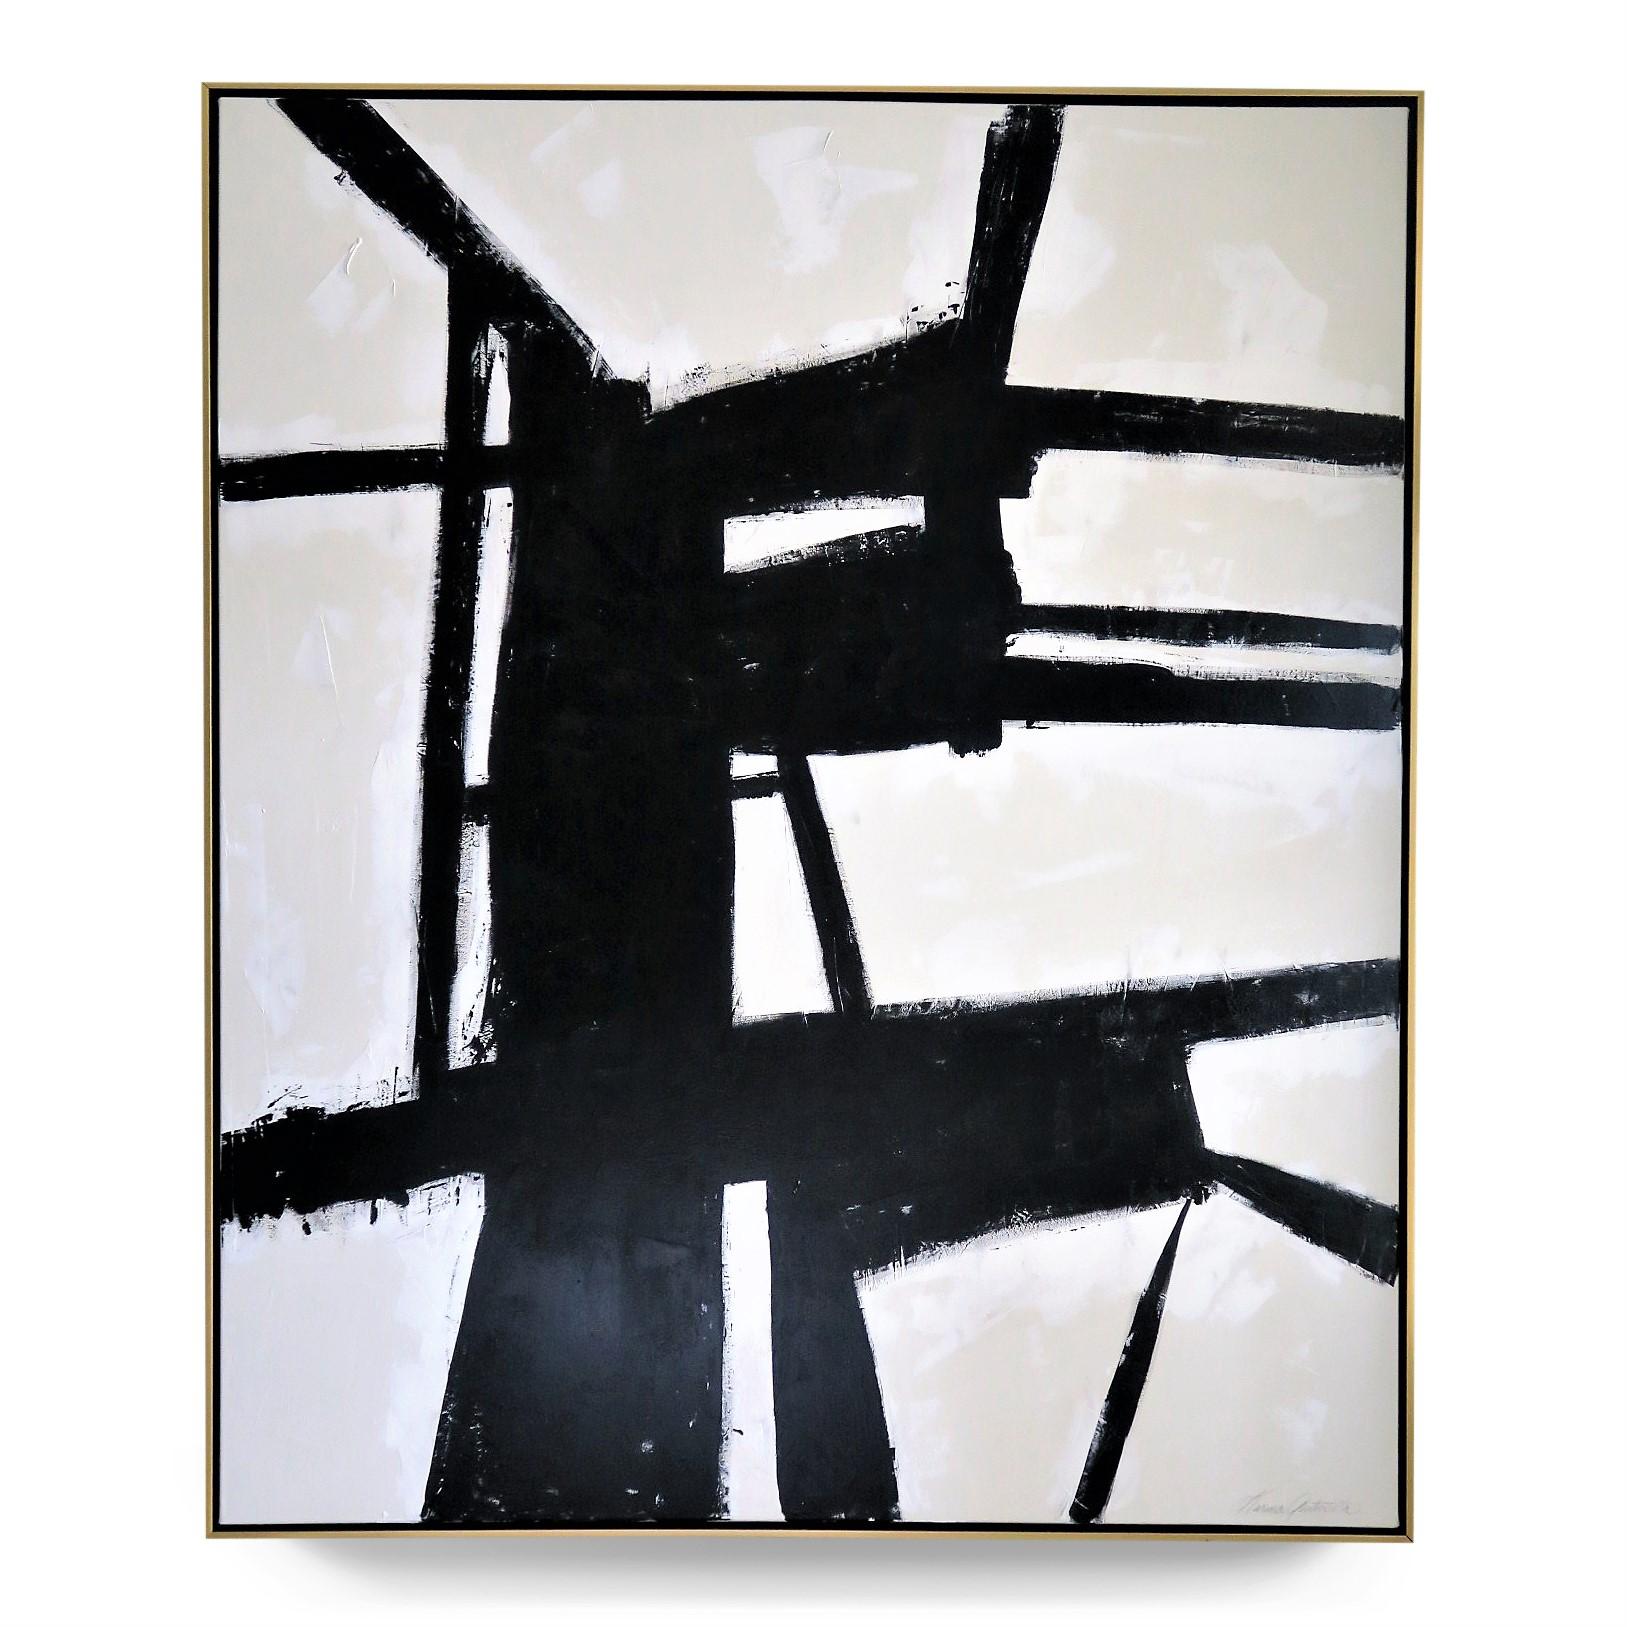 "Strength", 2019, 60" x 72". This is an original acrylic on stretched canvas abstract black and white painting by Argentine born artist Karina Gentinetta (featured in Elle Decor, the New York Times, Traditional Home and 2017 Luxe Magazine).